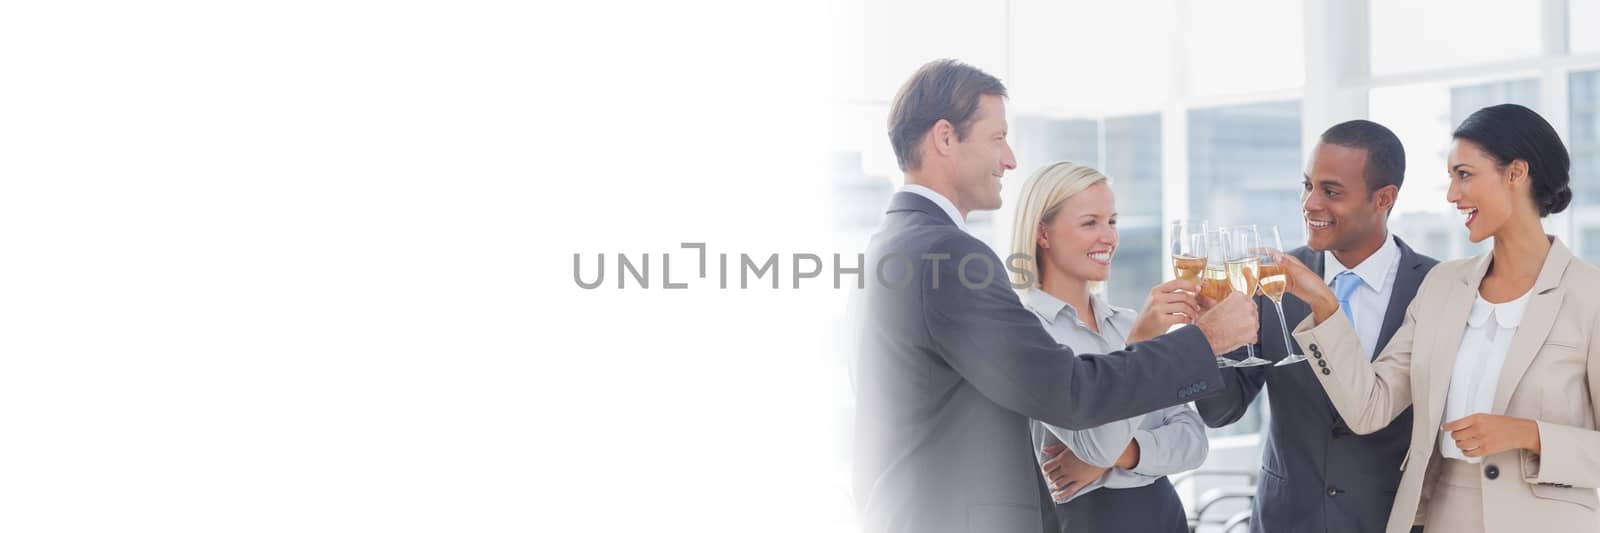 Digital composite of business people celebrating with champagne transition